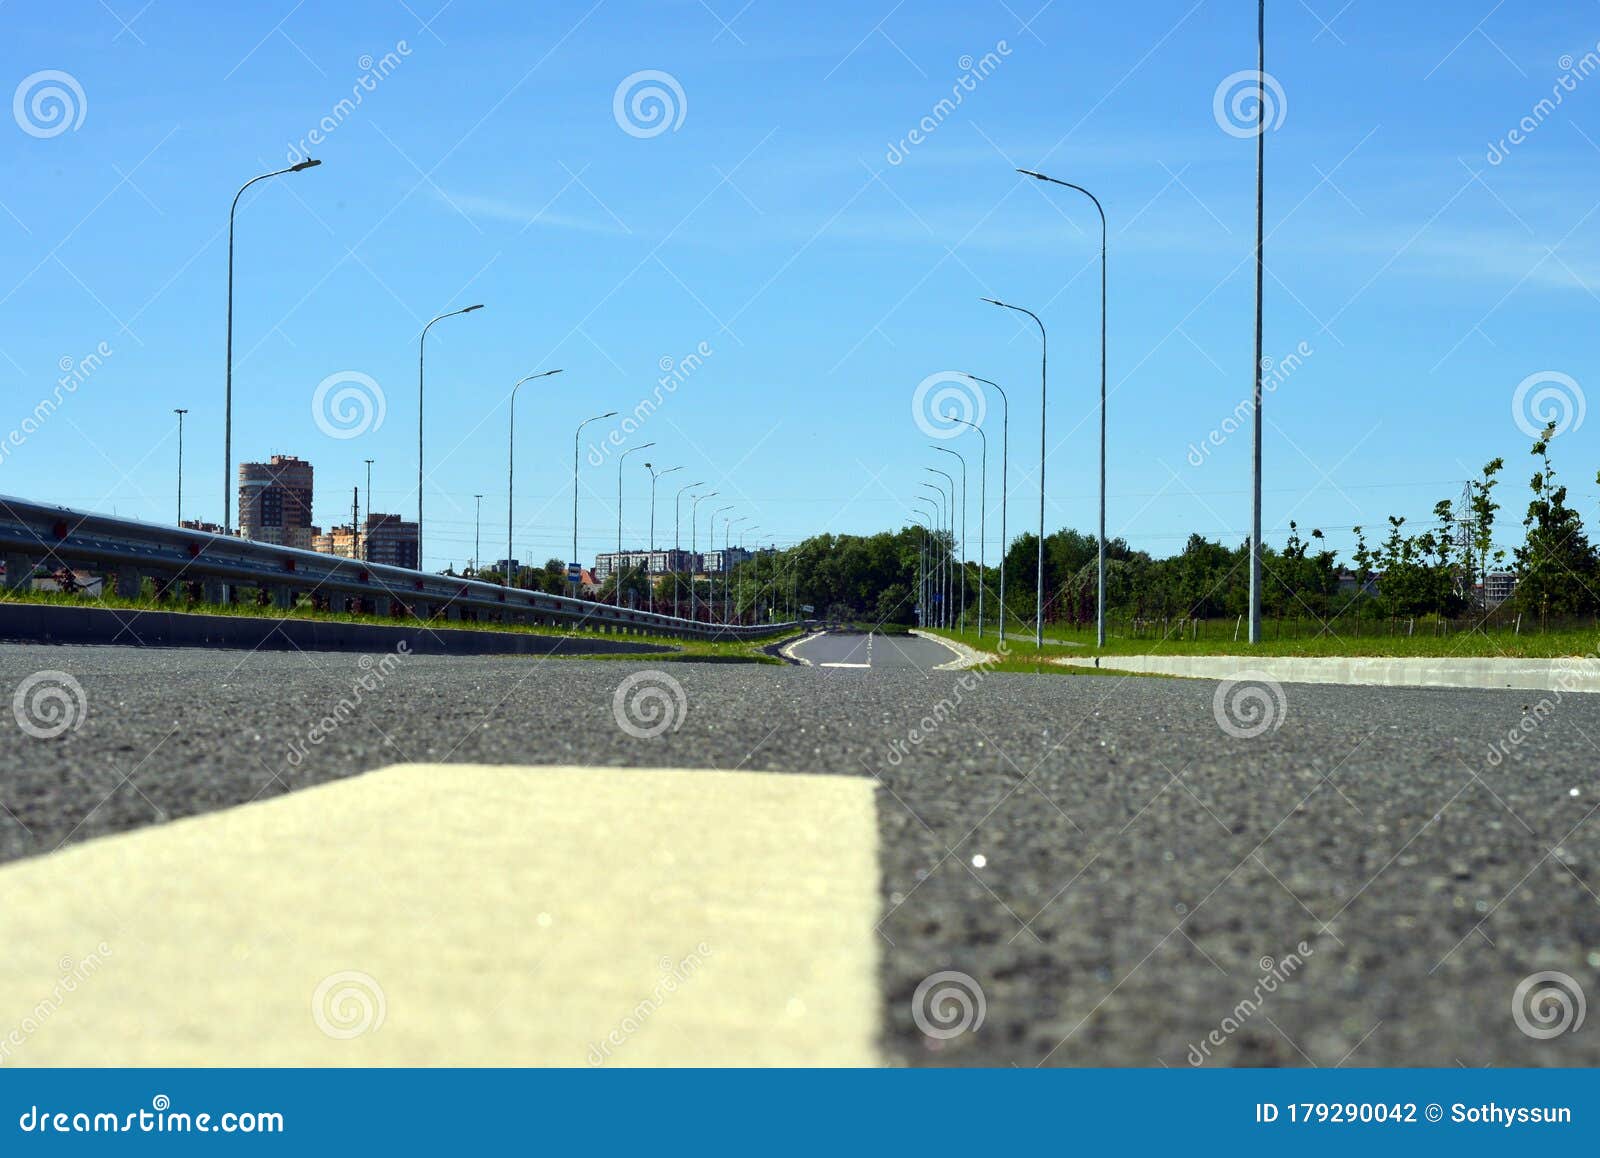 Empty Asphalt Road Without People And Cars Stock Photo - Image of ...